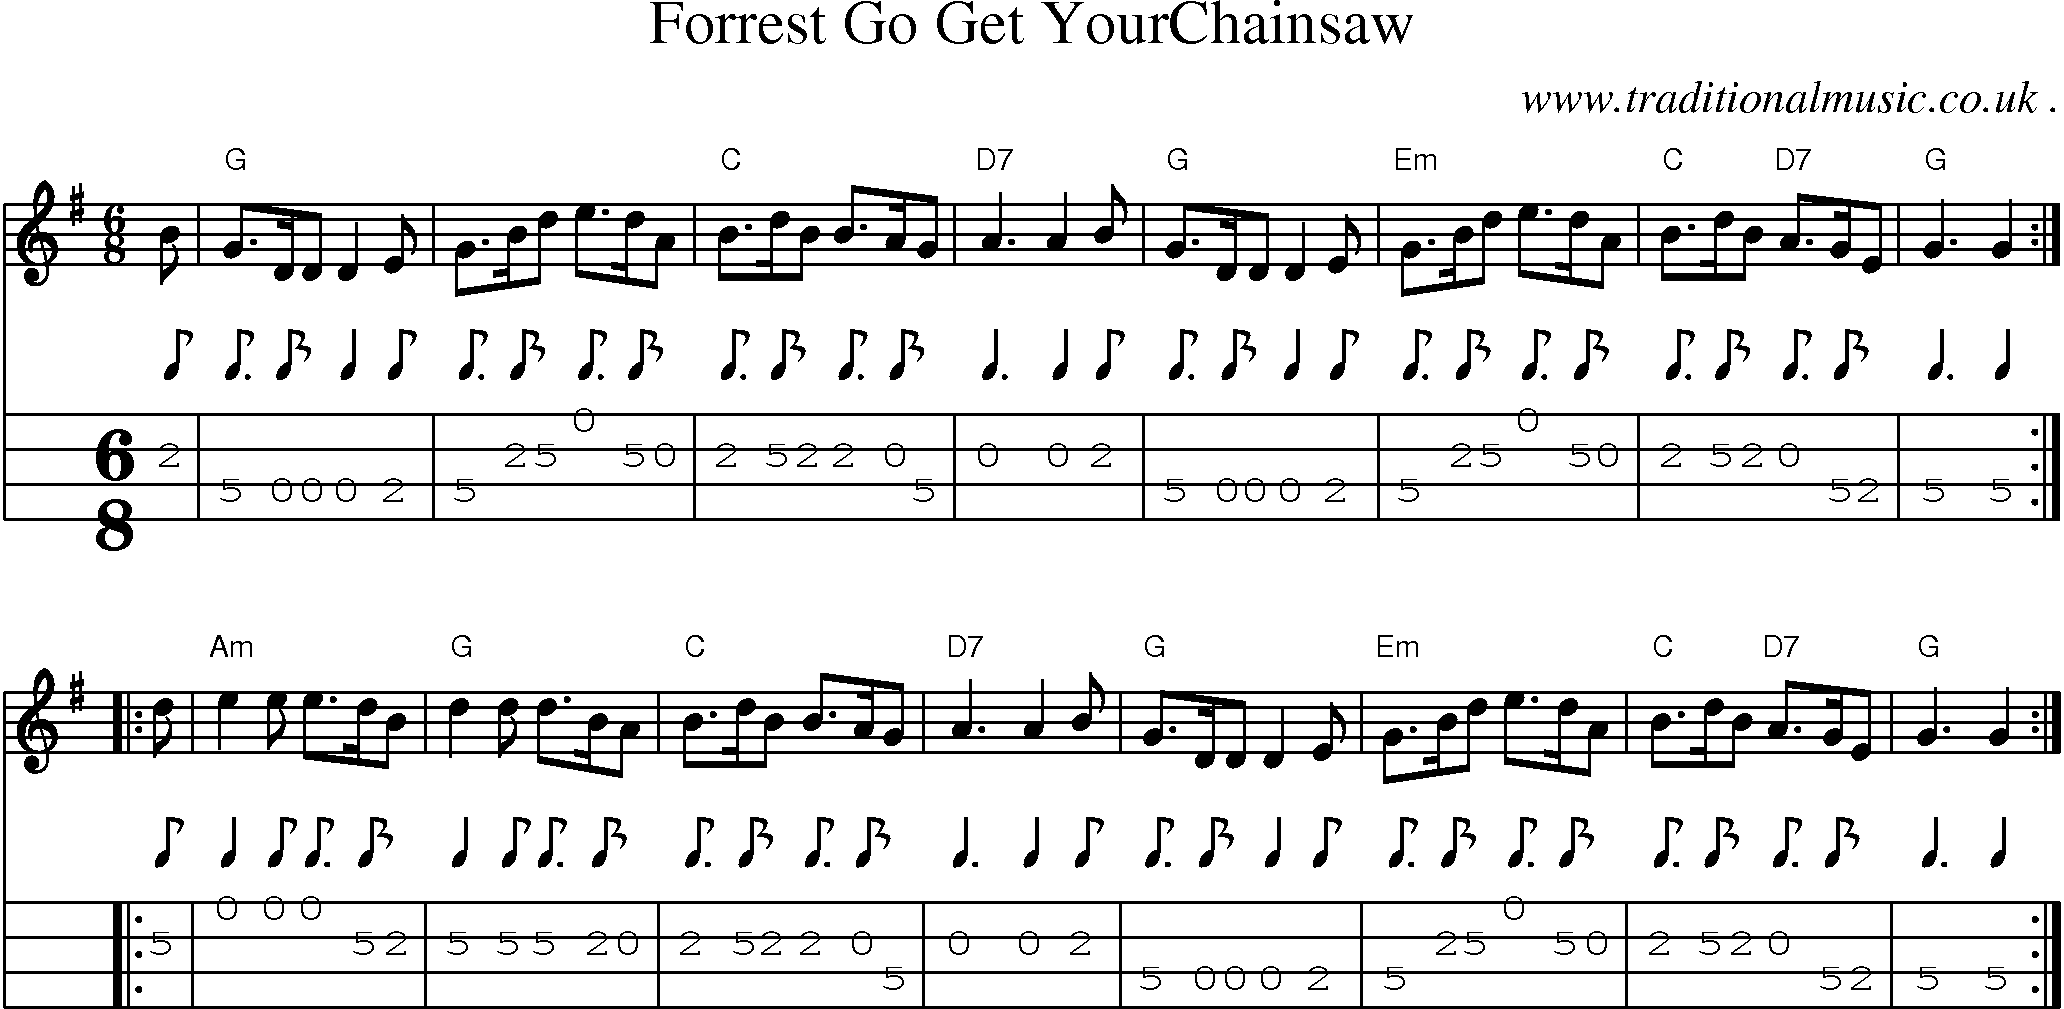 Sheet-music  score, Chords and Mandolin Tabs for Forrest Go Get Yourchainsaw